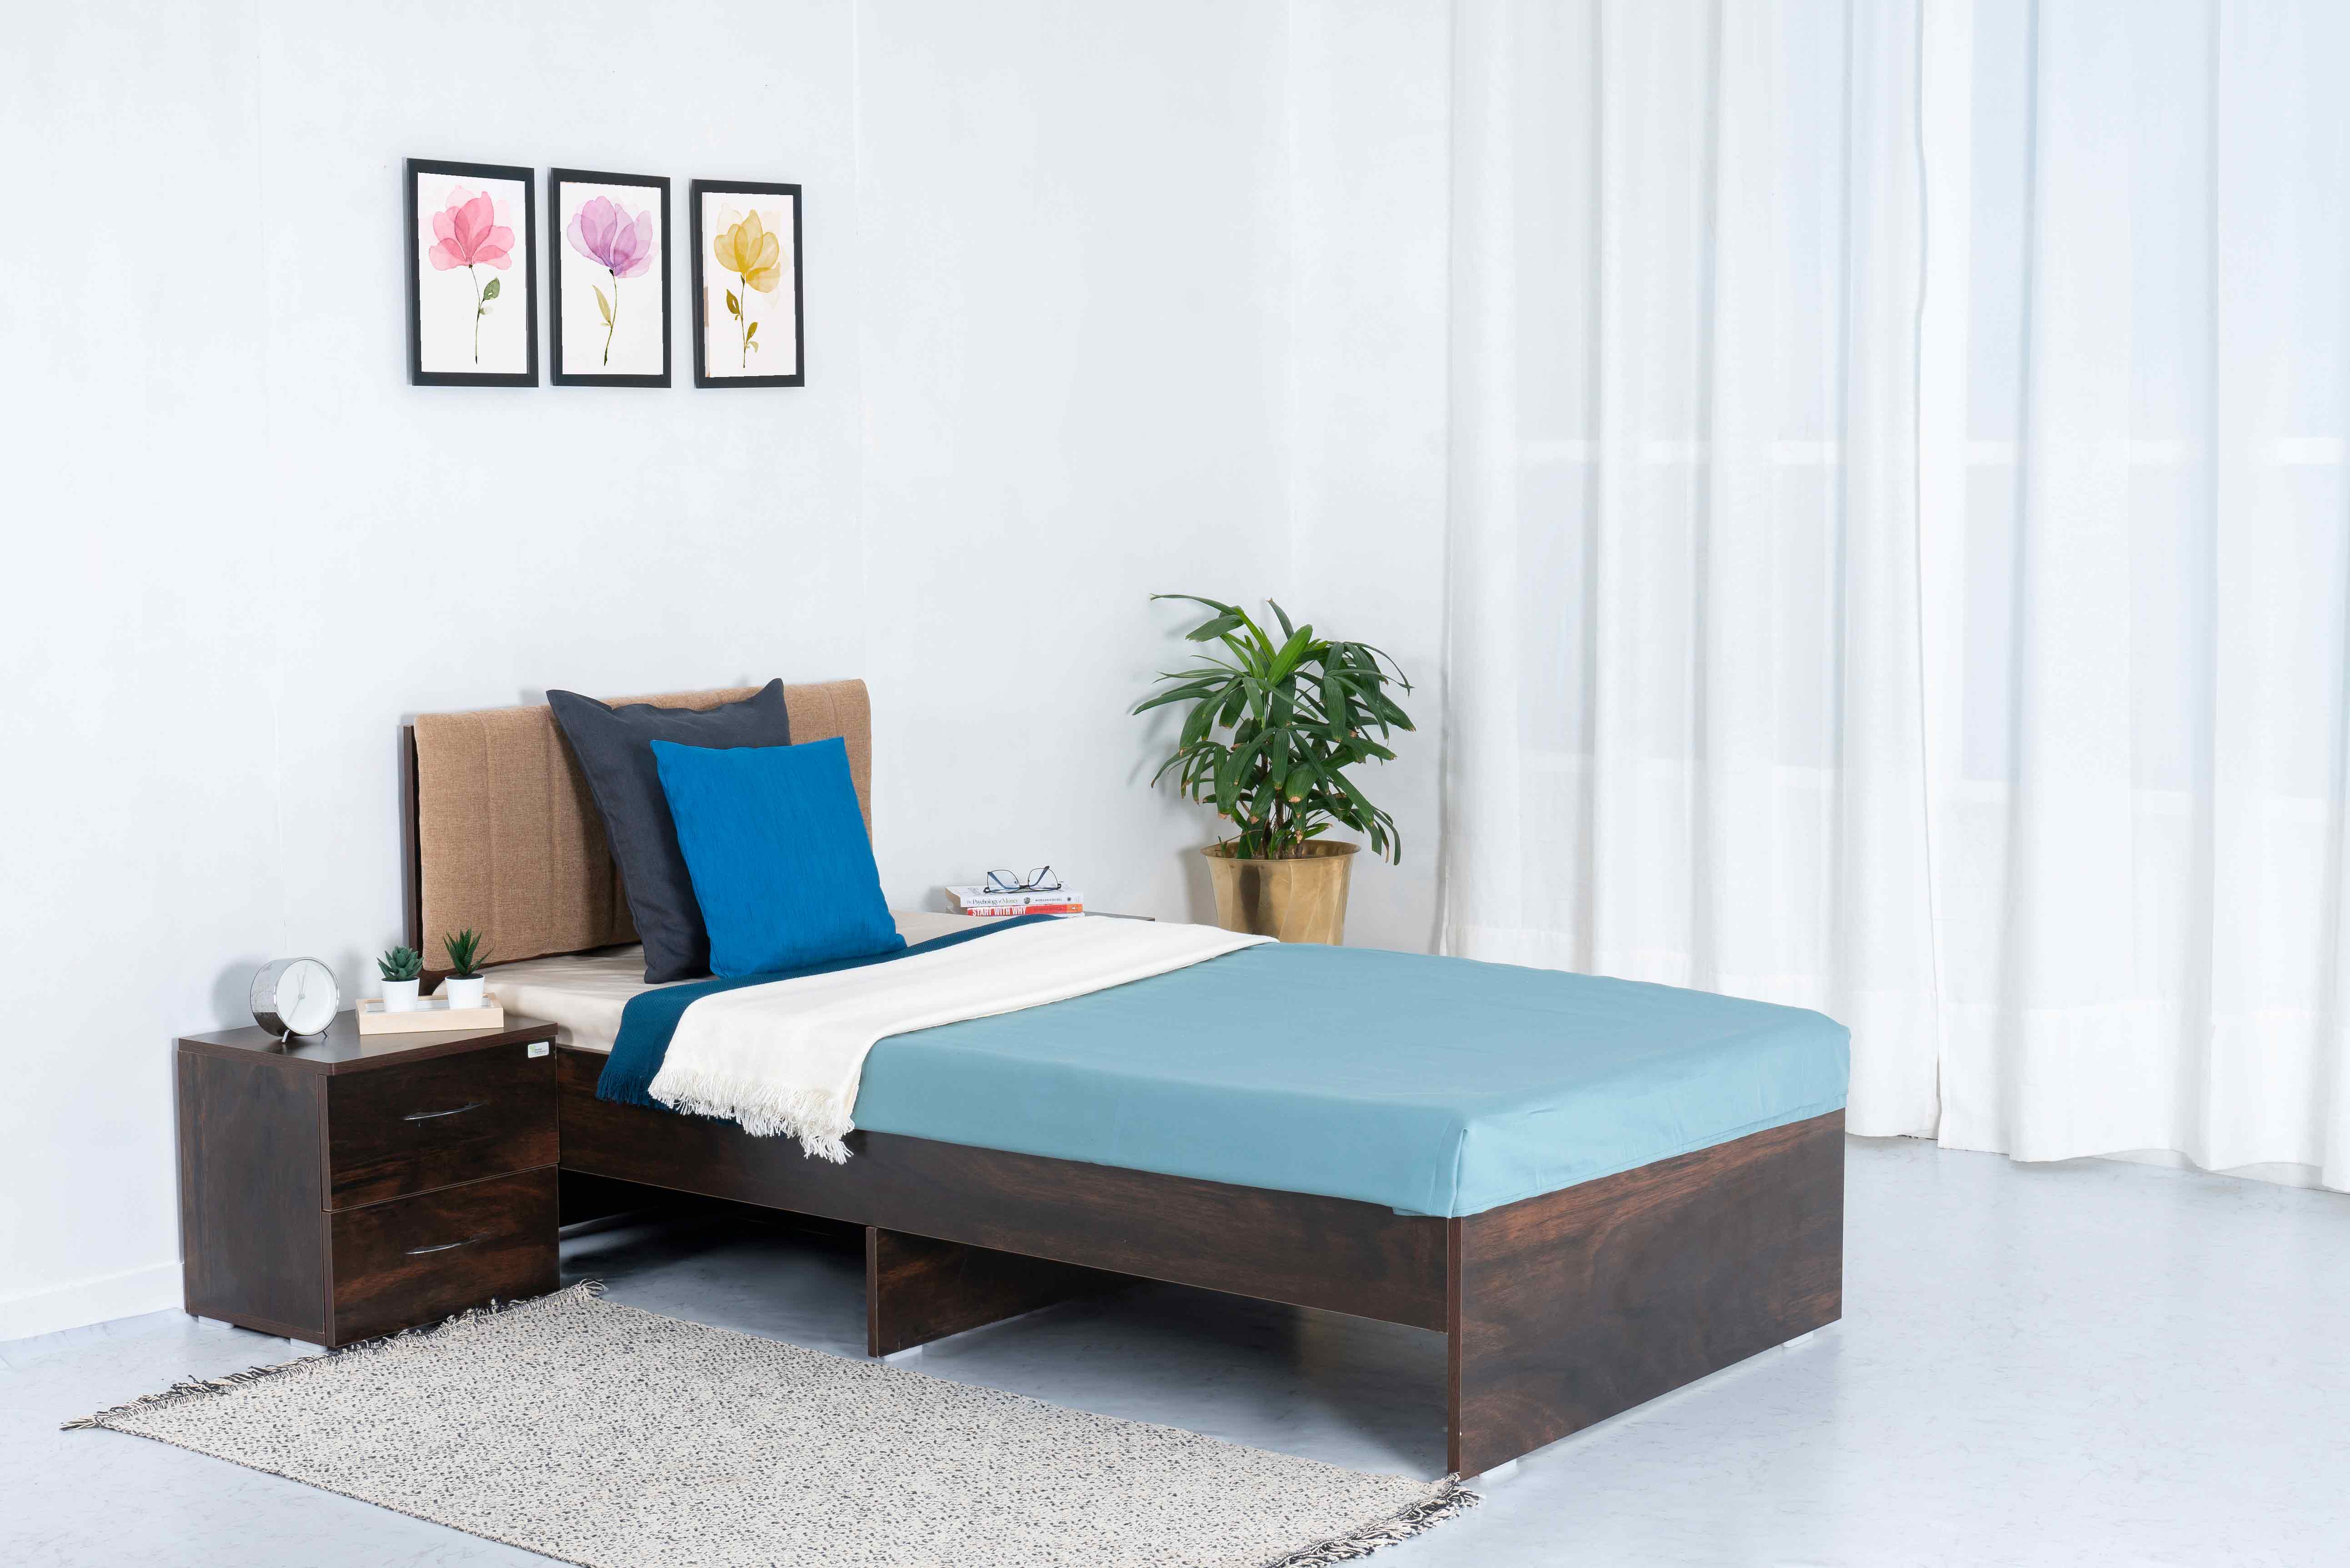 Sandy Beach Classic Wooden Single Bed without Mattress